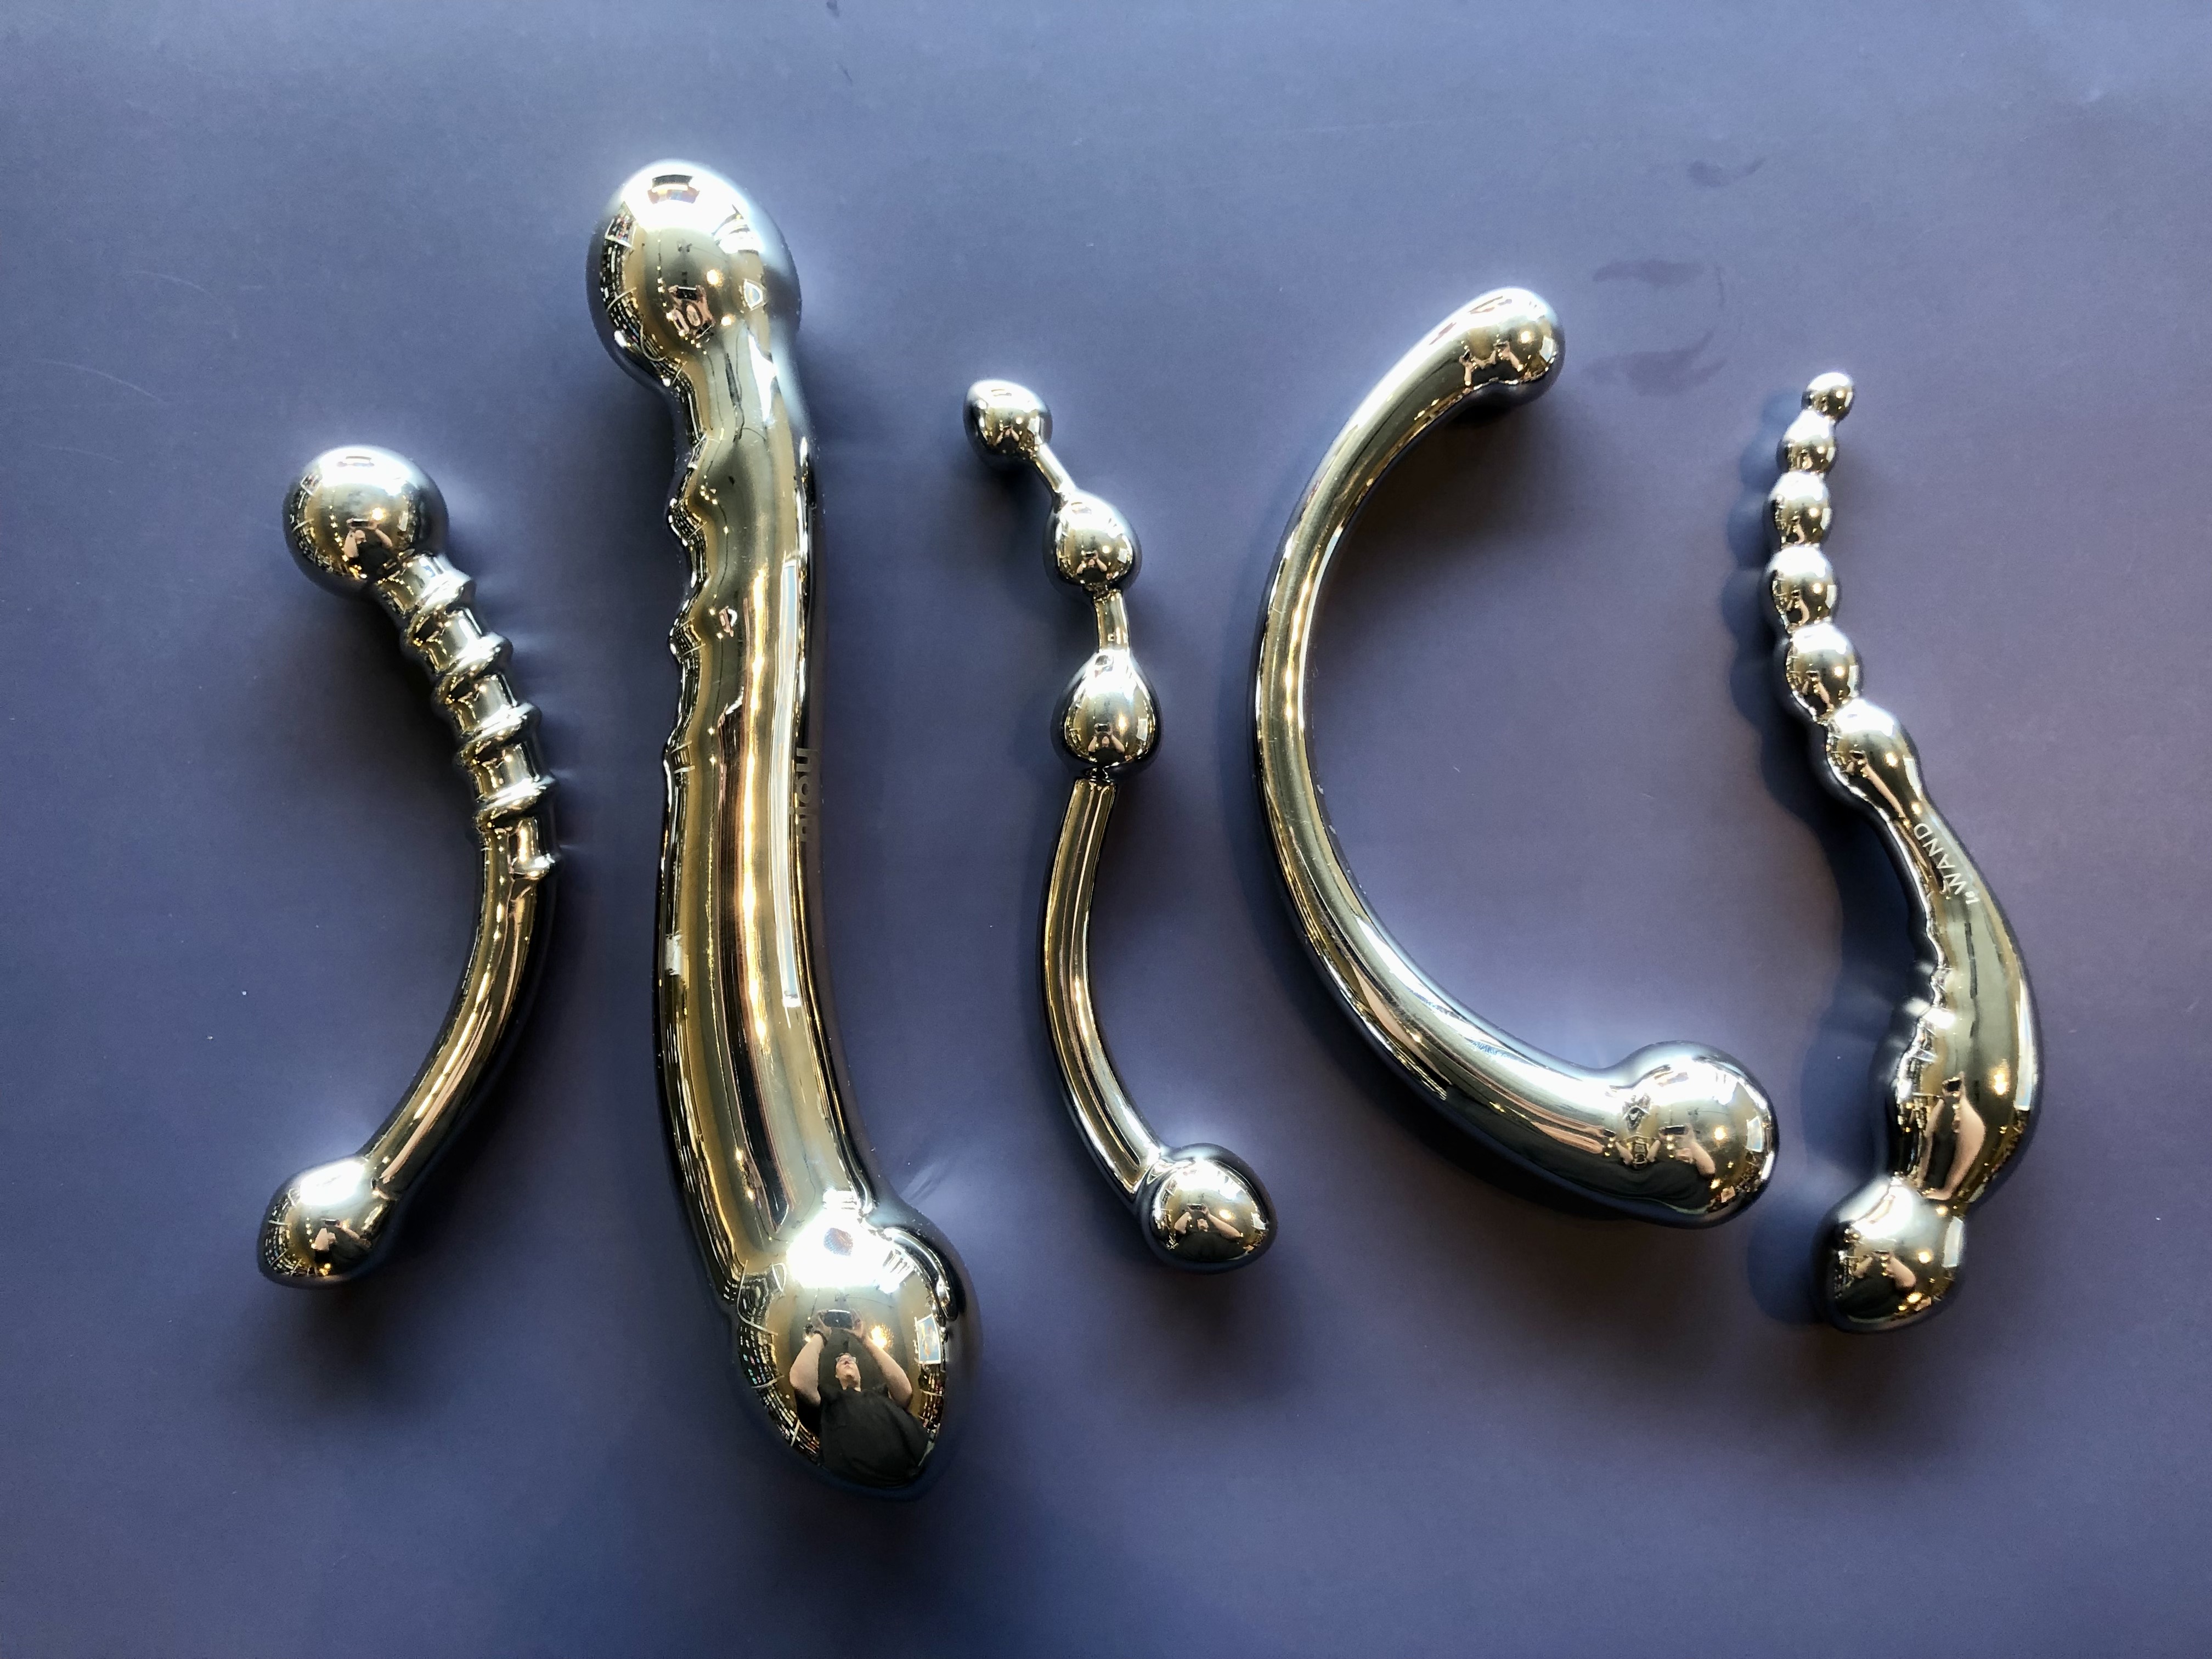 Stainless Steel Sex Toys